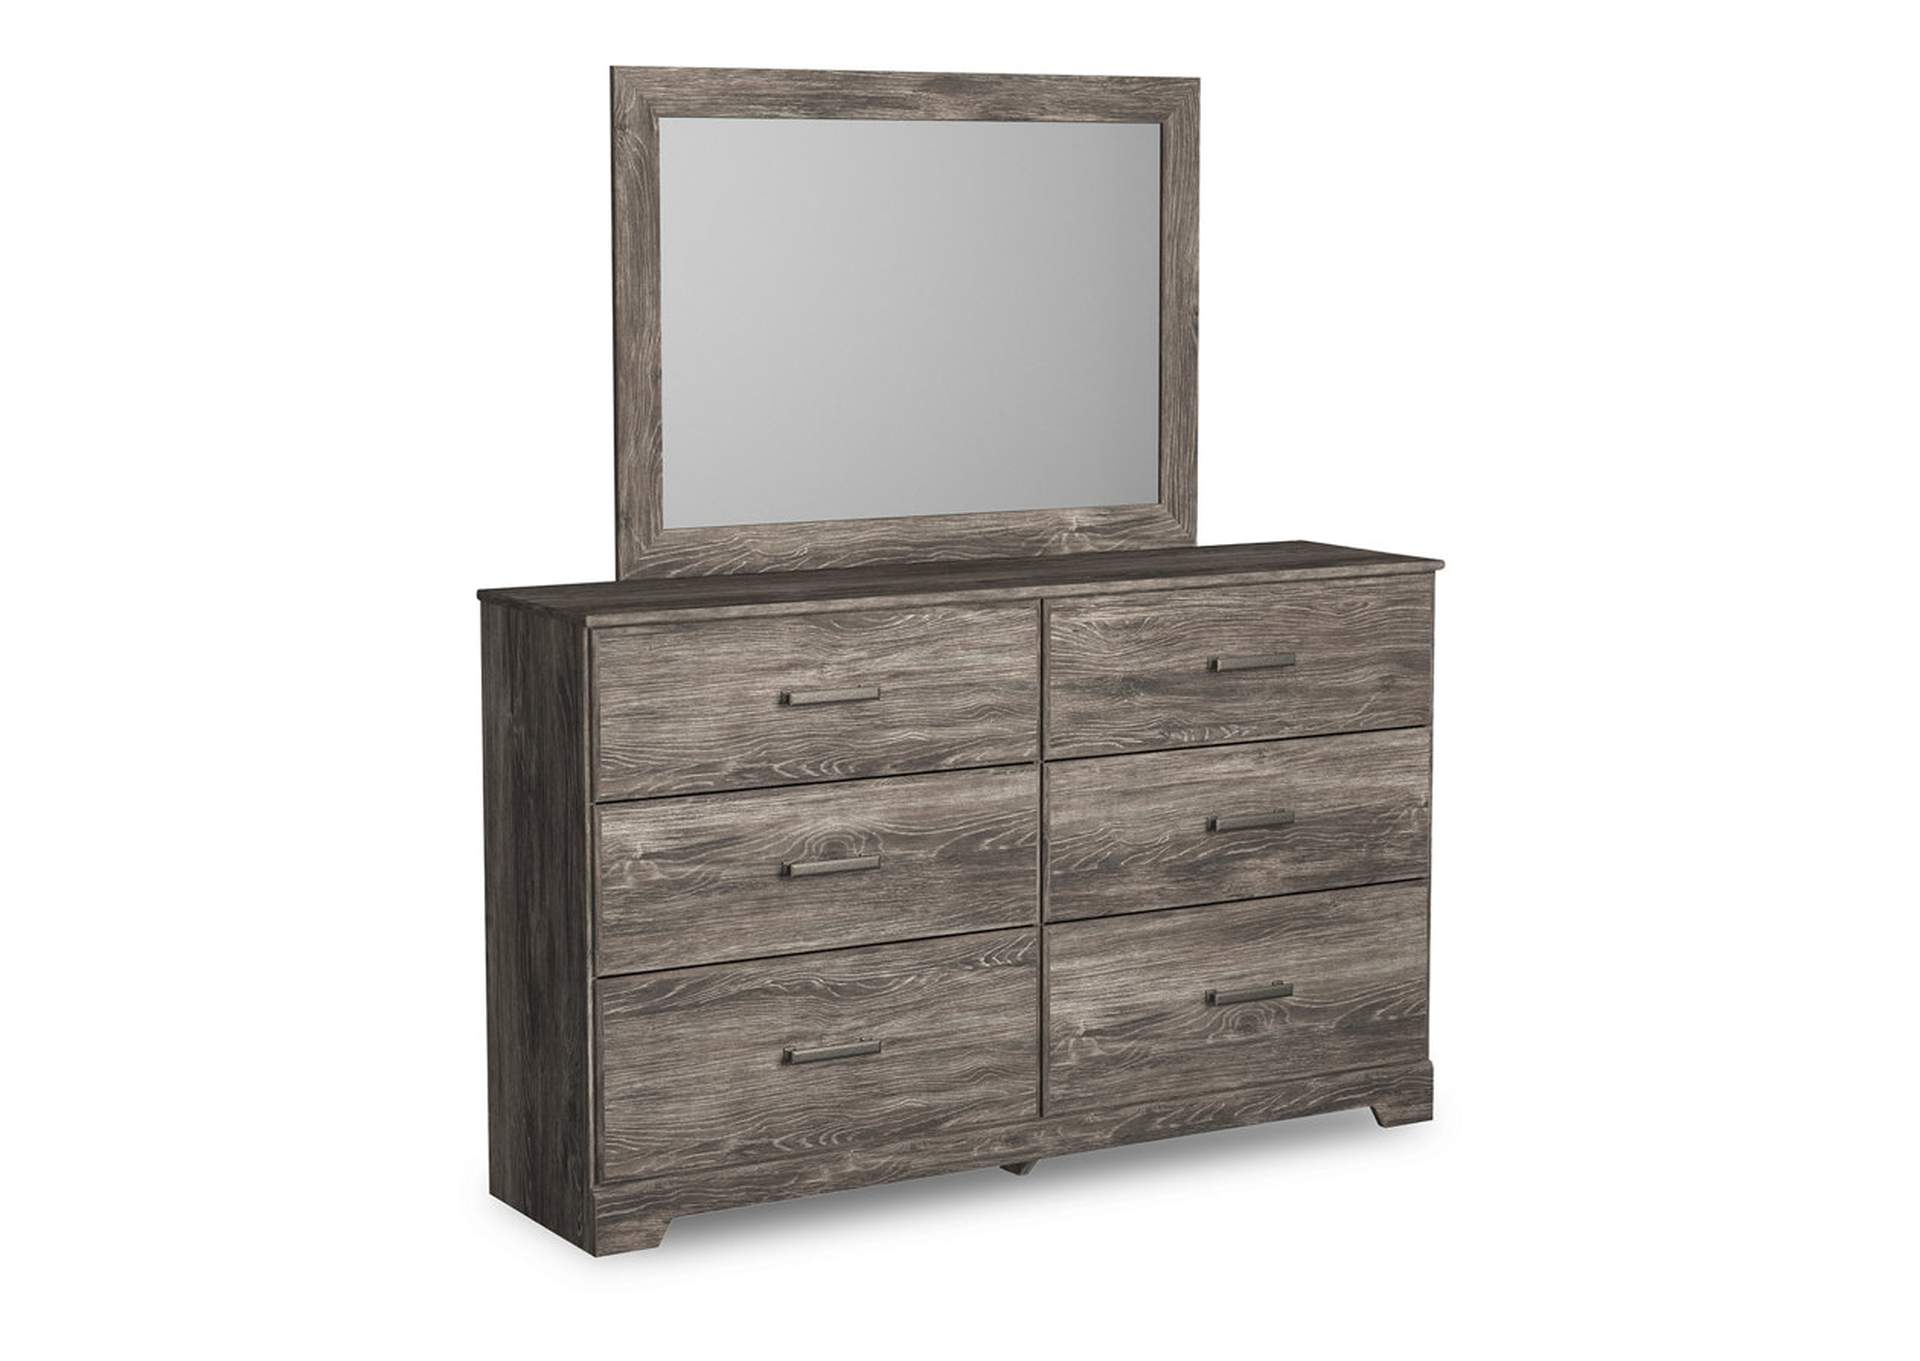 Ralinksi Twin Panel Bed with Mirrored Dresser and 2 Nightstands,Signature Design By Ashley